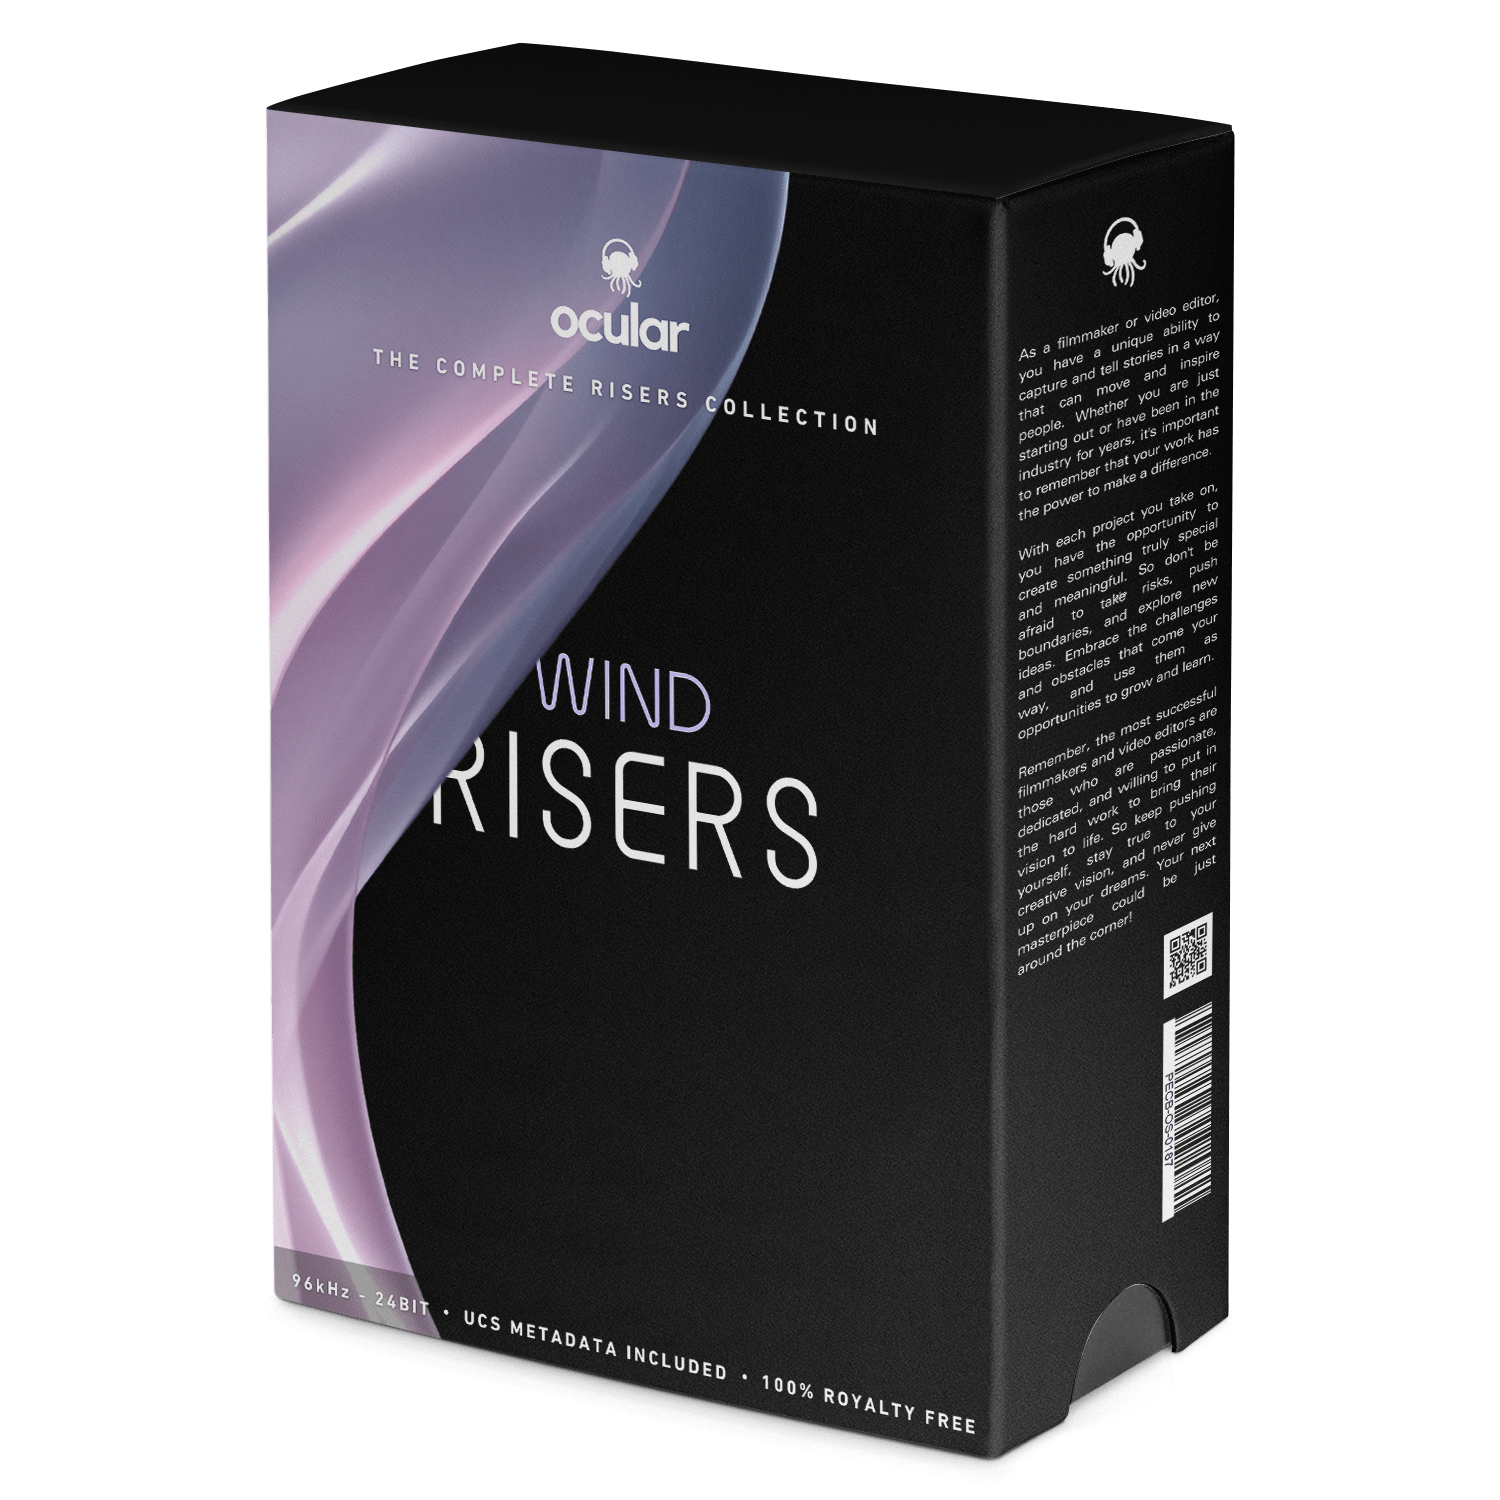 Wind Risers Sound Effects for Video Editing. Professional Sound FX Library.